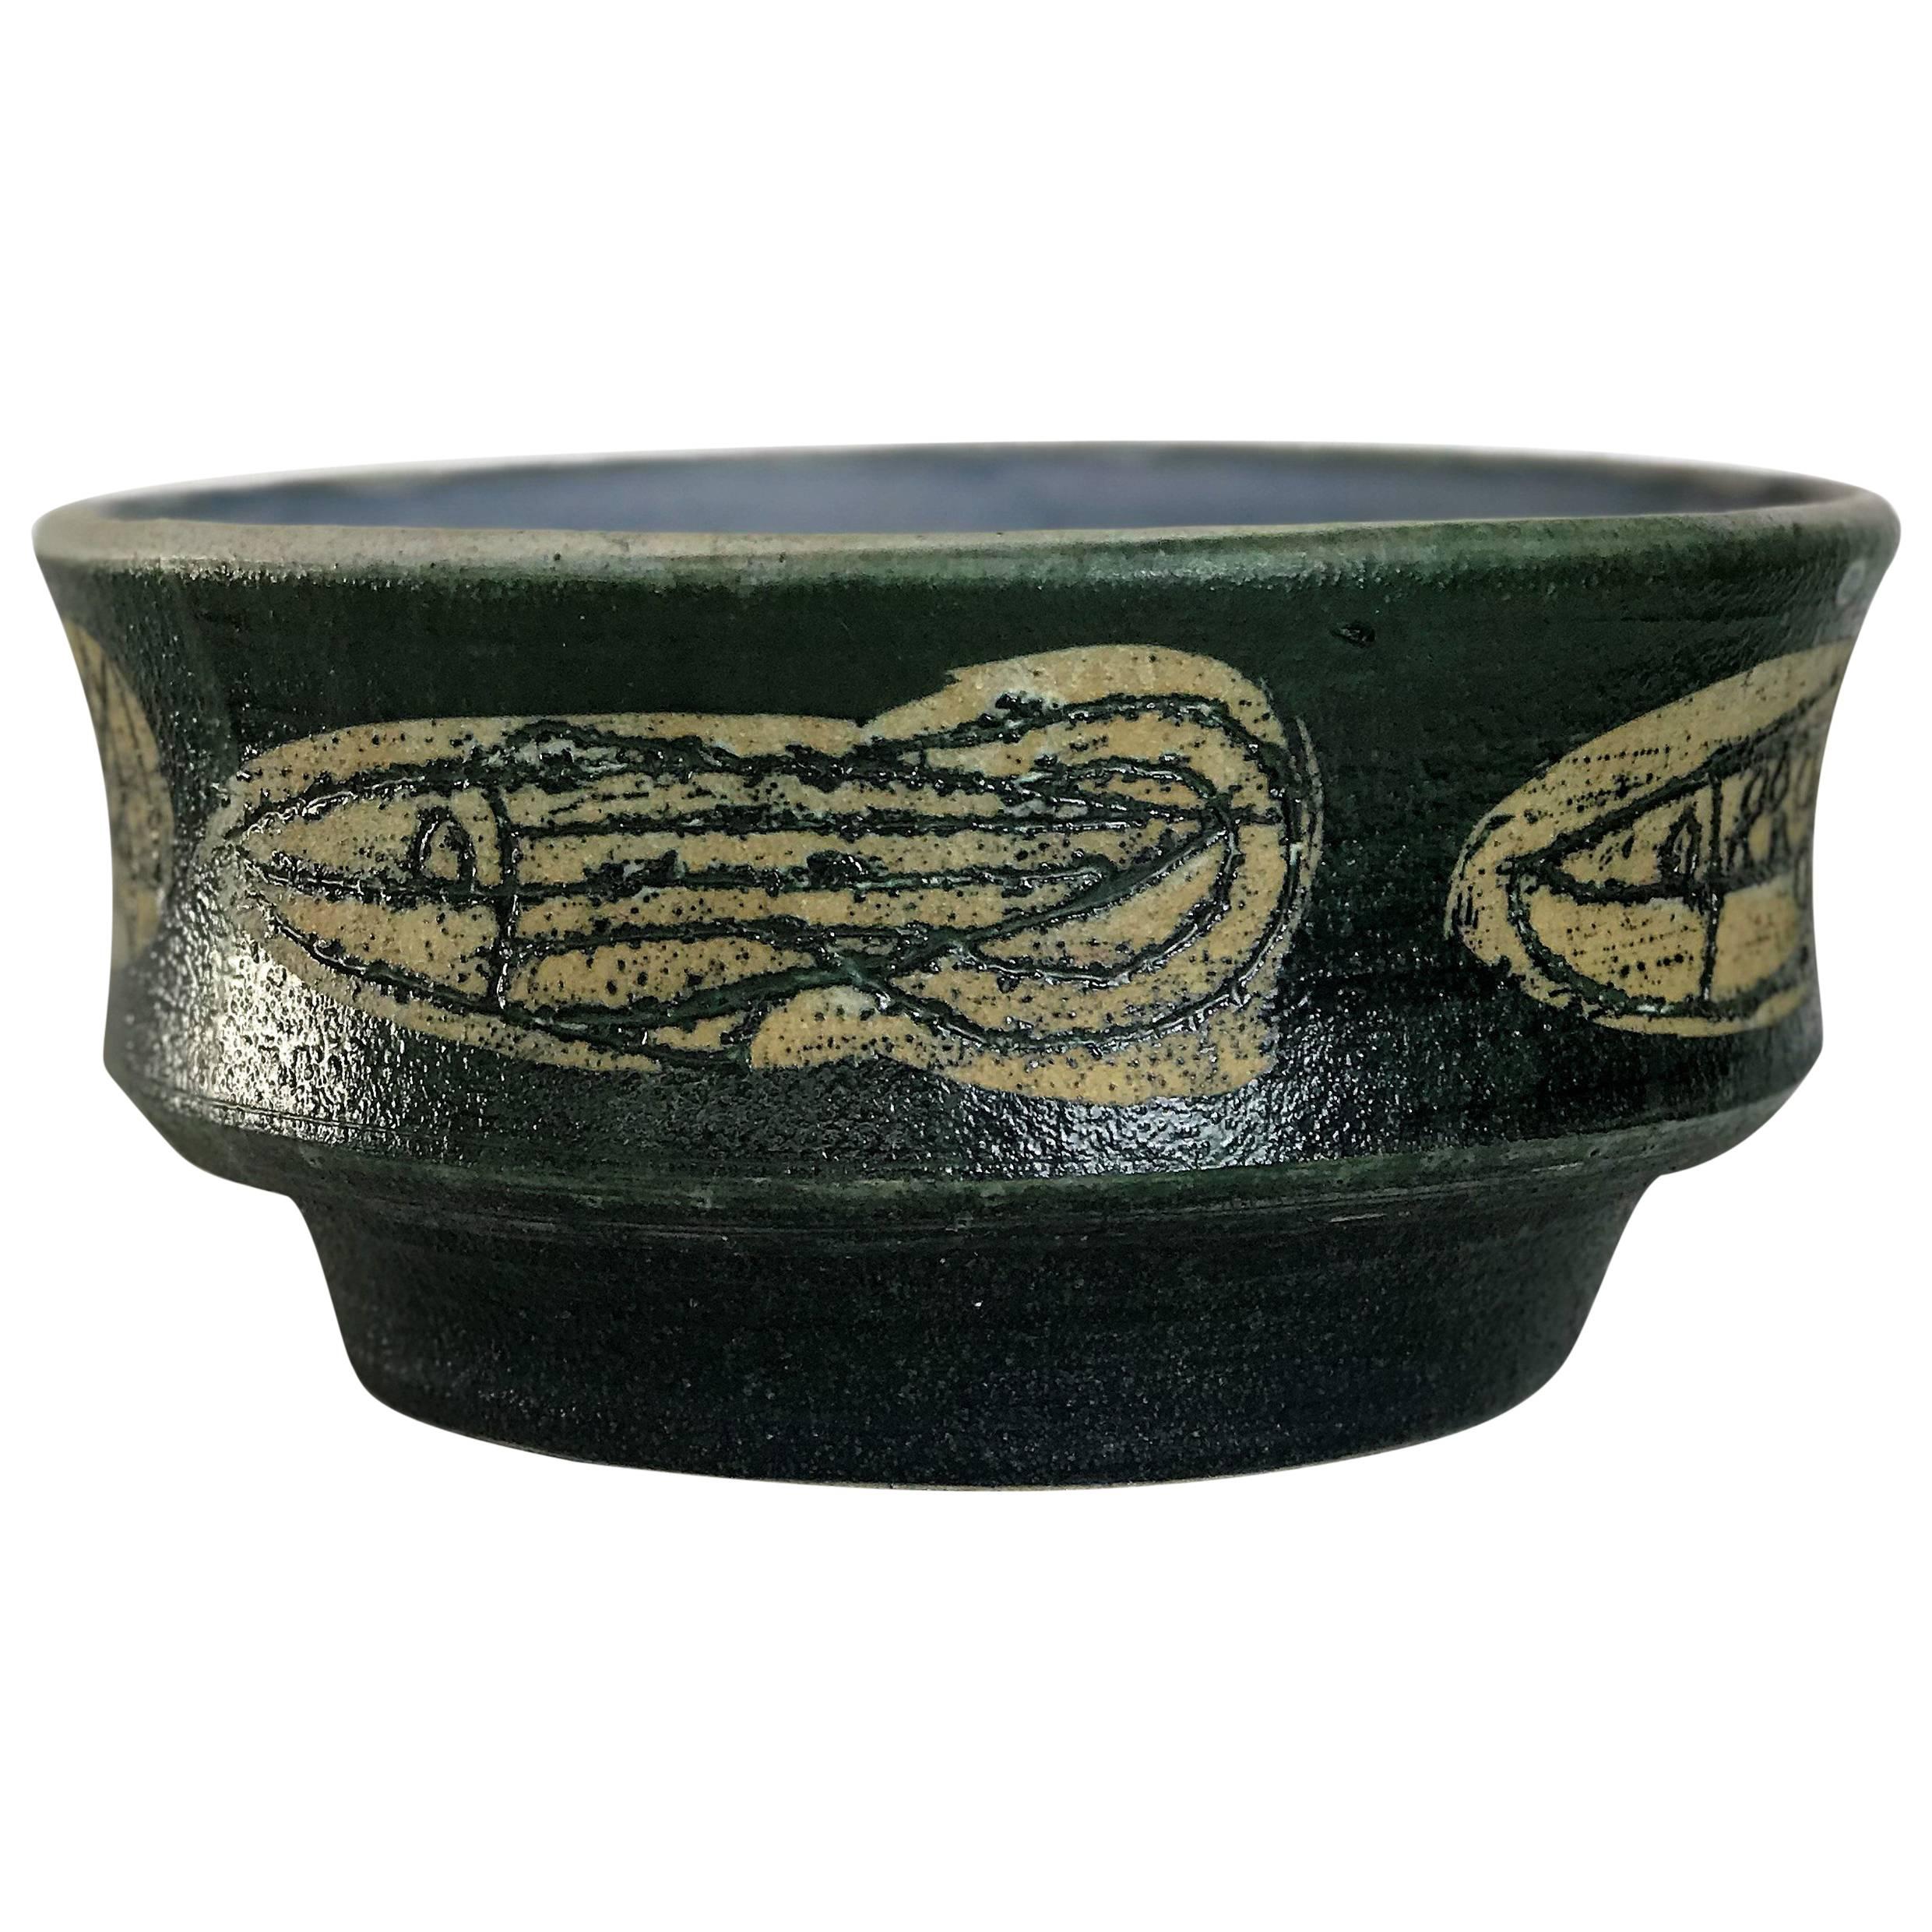 Modernist Neolithic Fish Studio Ceramic Bowl by Listed Artist Frank Colson